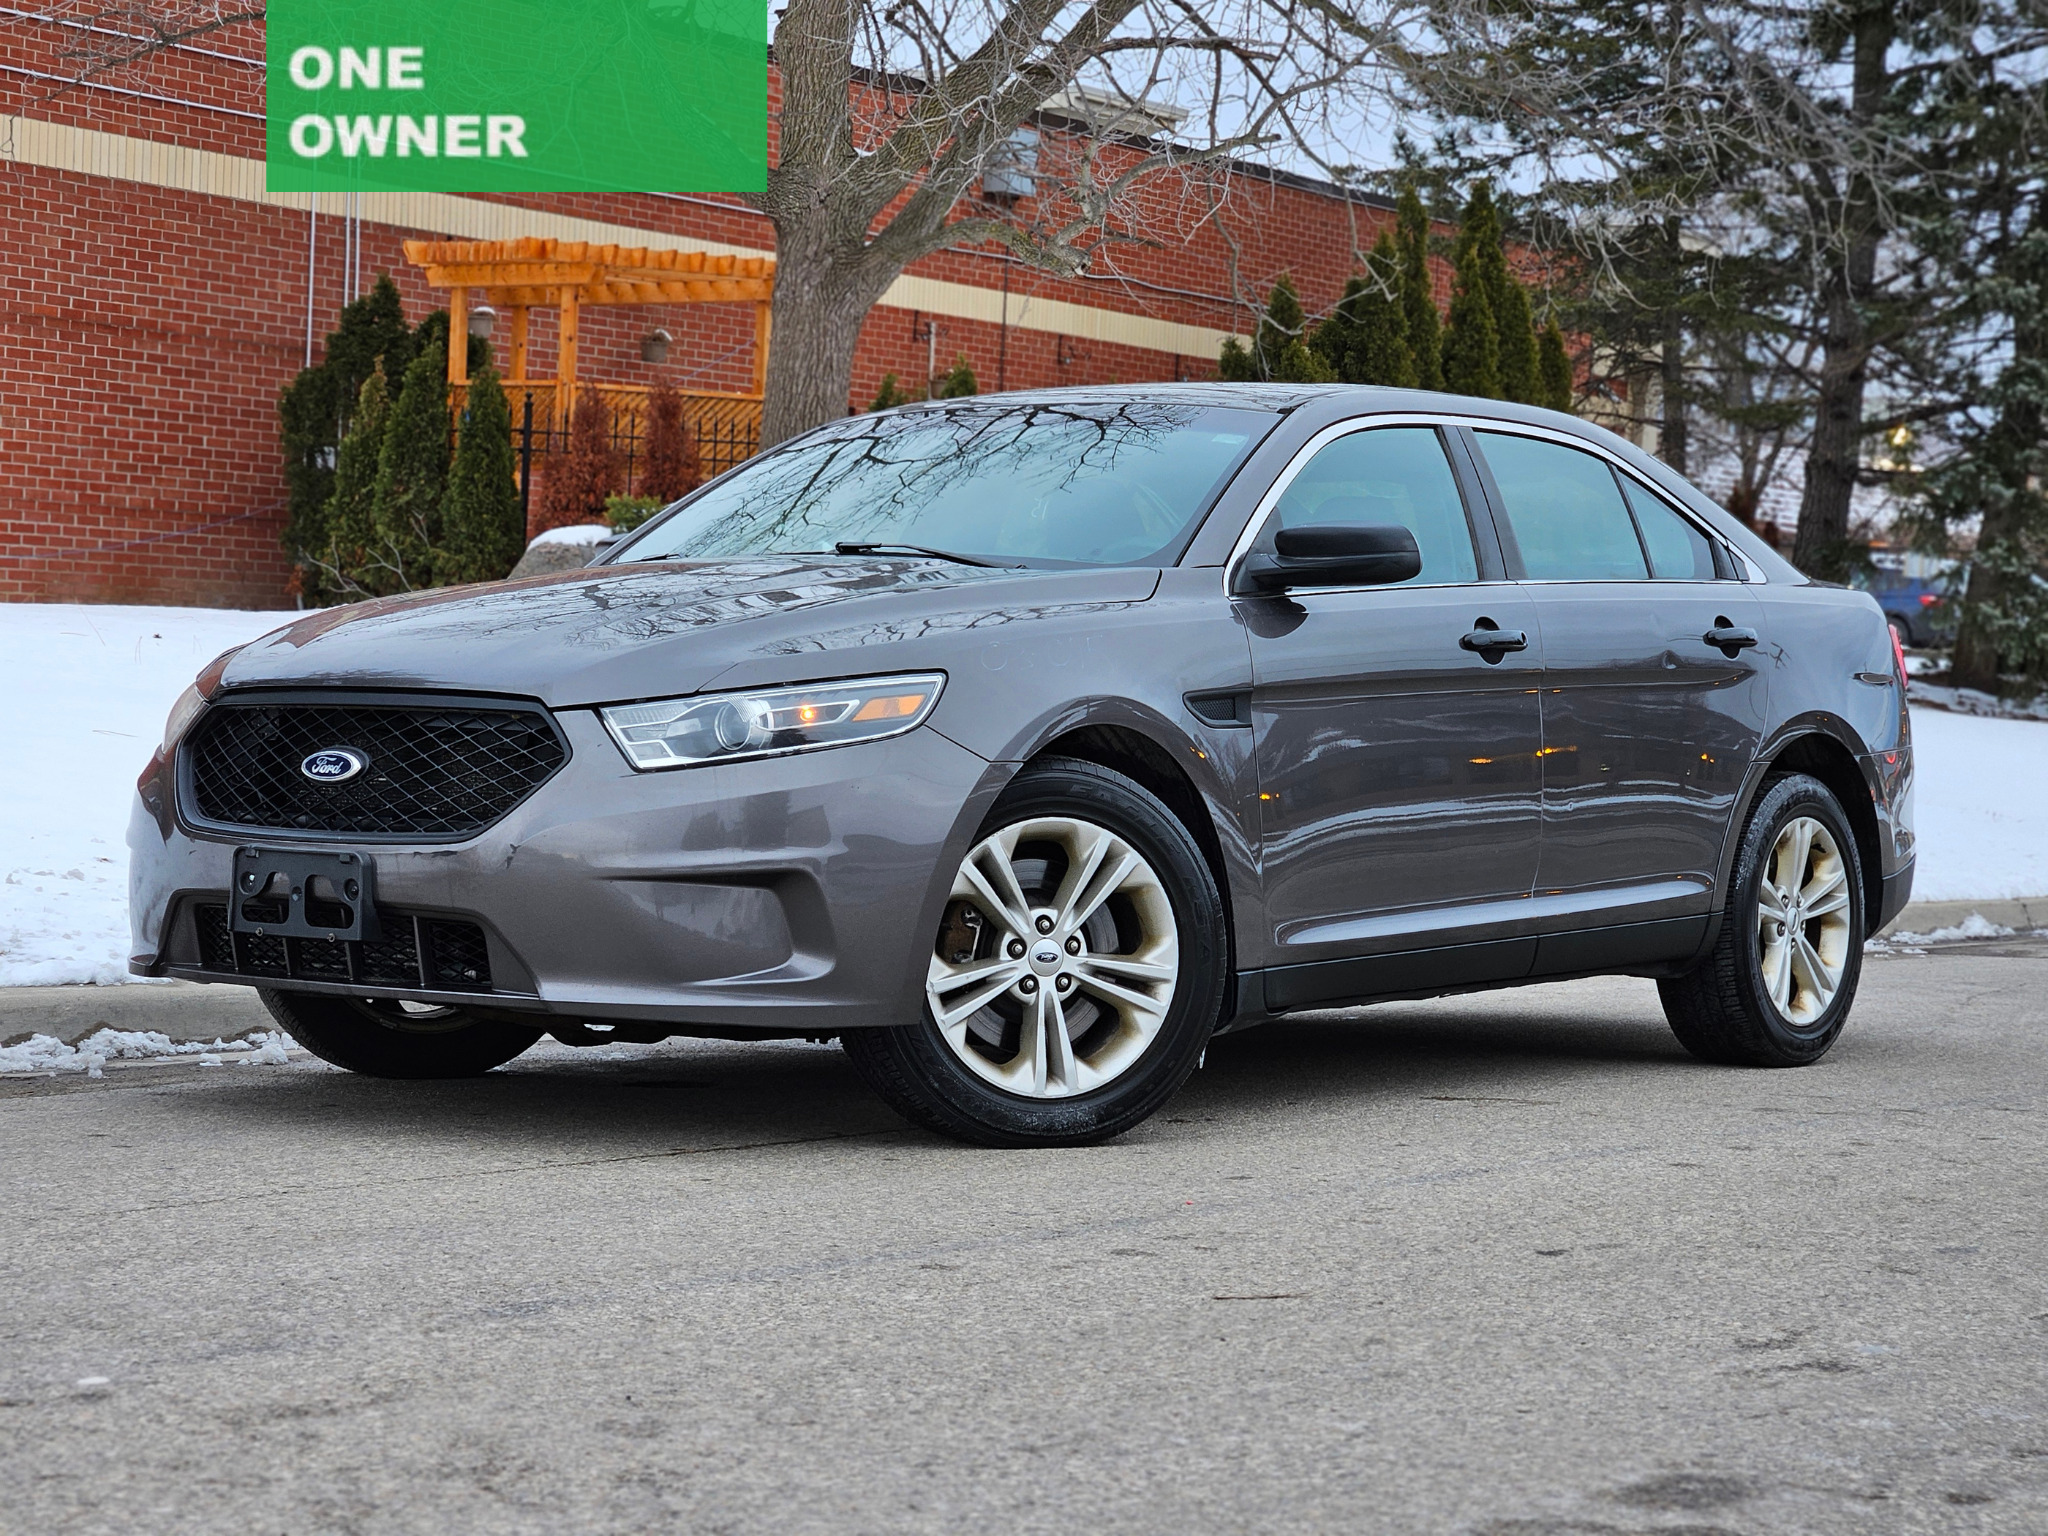 2015 Ford Taurus AWD **33 Service Records** Detective CAR 624 Hours